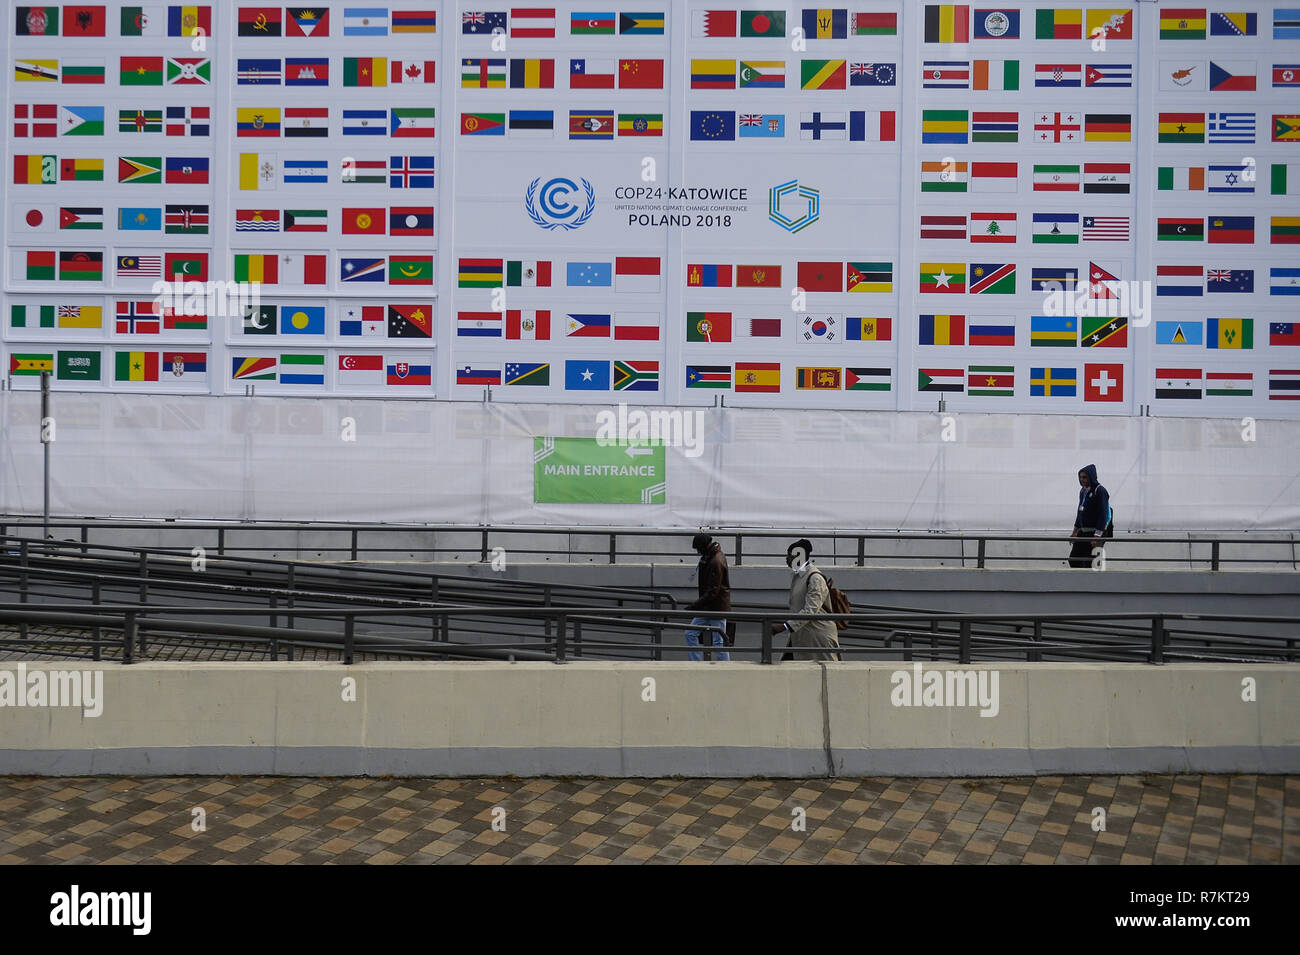 People seen passing by COP24 members flags during the UN Climate change conference (COP24). The 2018 United Nations climate change conference (COP24) is now entering the second week of negotiations and ends on 14th December in Katowice. Stock Photo